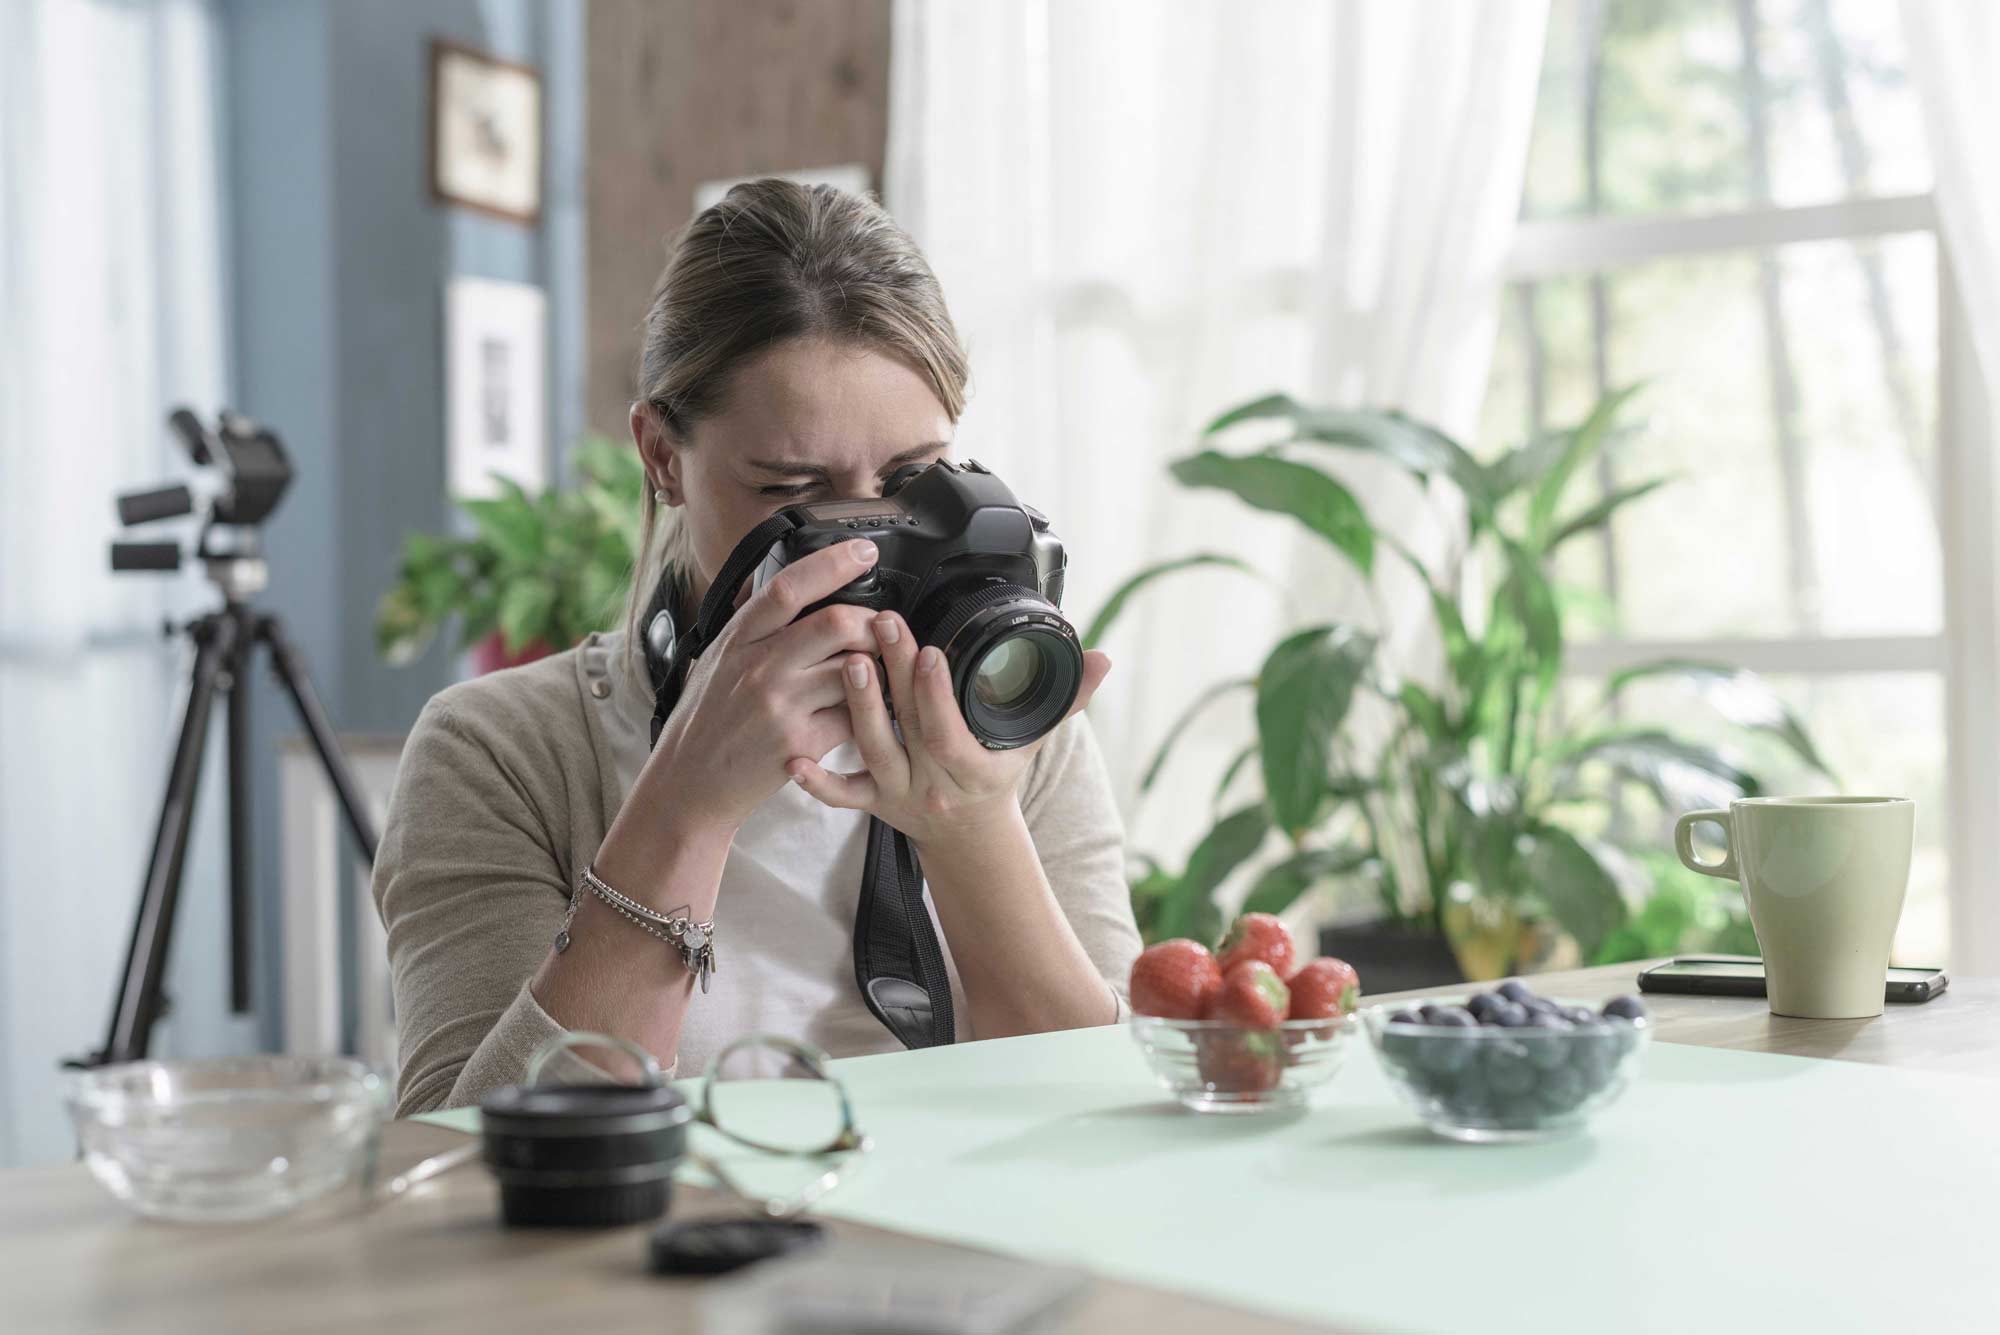 Lifestyle product photography tips that help increase online sales